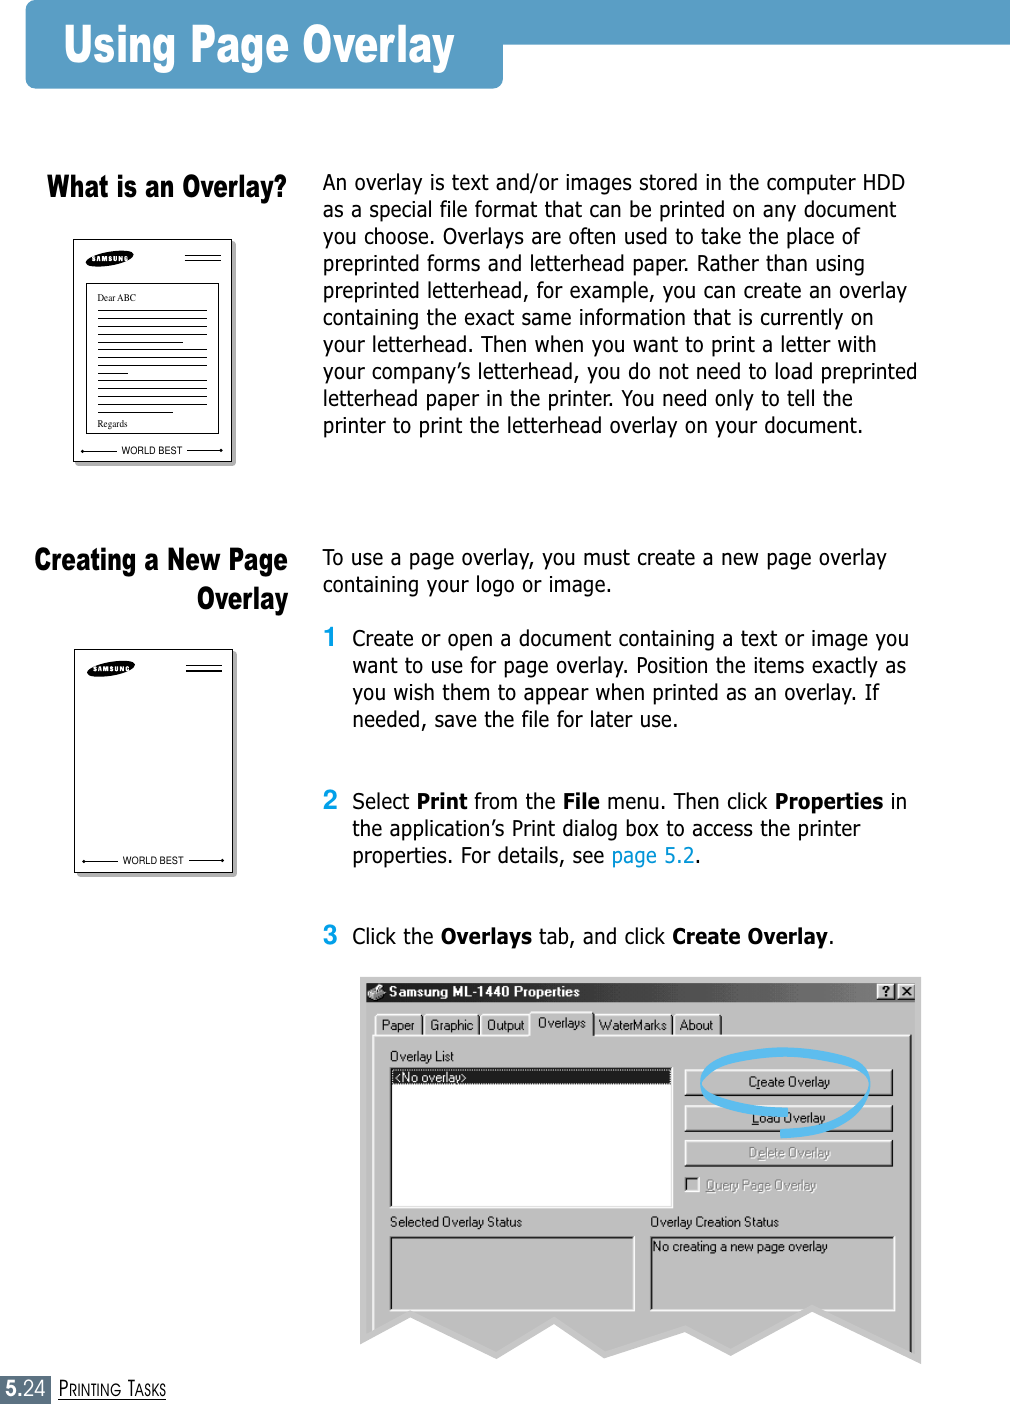 5.24PRINTING TASKSUsing Page OverlayAn overlay is text and/or images stored in the computer HDDas a special file format that can be printed on any documentyou choose. Overlays are often used to take the place ofpreprinted forms and letterhead paper. Rather than usingpreprinted letterhead, for example, you can create an overlaycontaining the exact same information that is currently onyour letterhead. Then when you want to print a letter withyour company’s letterhead, you do not need to load preprintedletterhead paper in the printer. You need only to tell theprinter to print the letterhead overlay on your document.What is an Overlay?WORLD BESTDear ABCRegardsTo use a page overlay, you must create a new page overlaycontaining your logo or image.1Create or open a document containing a text or image youwant to use for page overlay. Position the items exactly asyou wish them to appear when printed as an overlay. Ifneeded, save the file for later use.2Select Print from the File menu. Then click Properties inthe application’s Print dialog box to access the printerproperties. For details, see page 5.2.3Click the Overlays tab, and click Create Overlay.Creating a New PageOverlayWORLD BEST